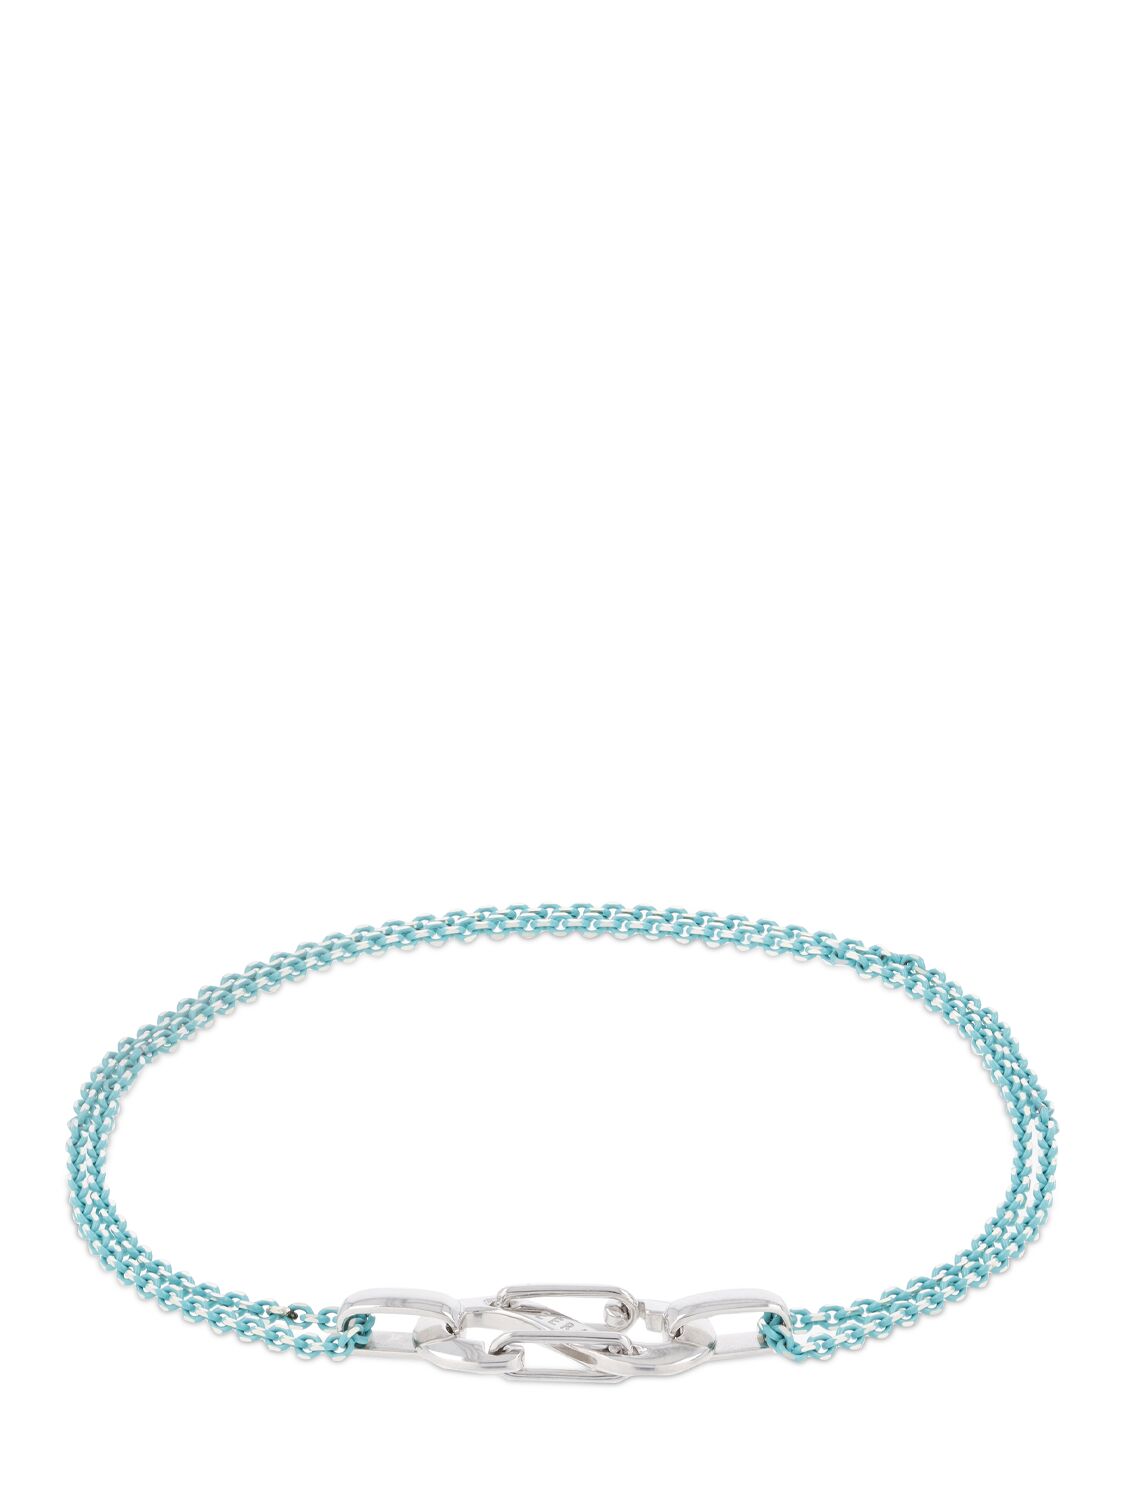 Eéra Romy White Gold And Silver Bracelet In Blue